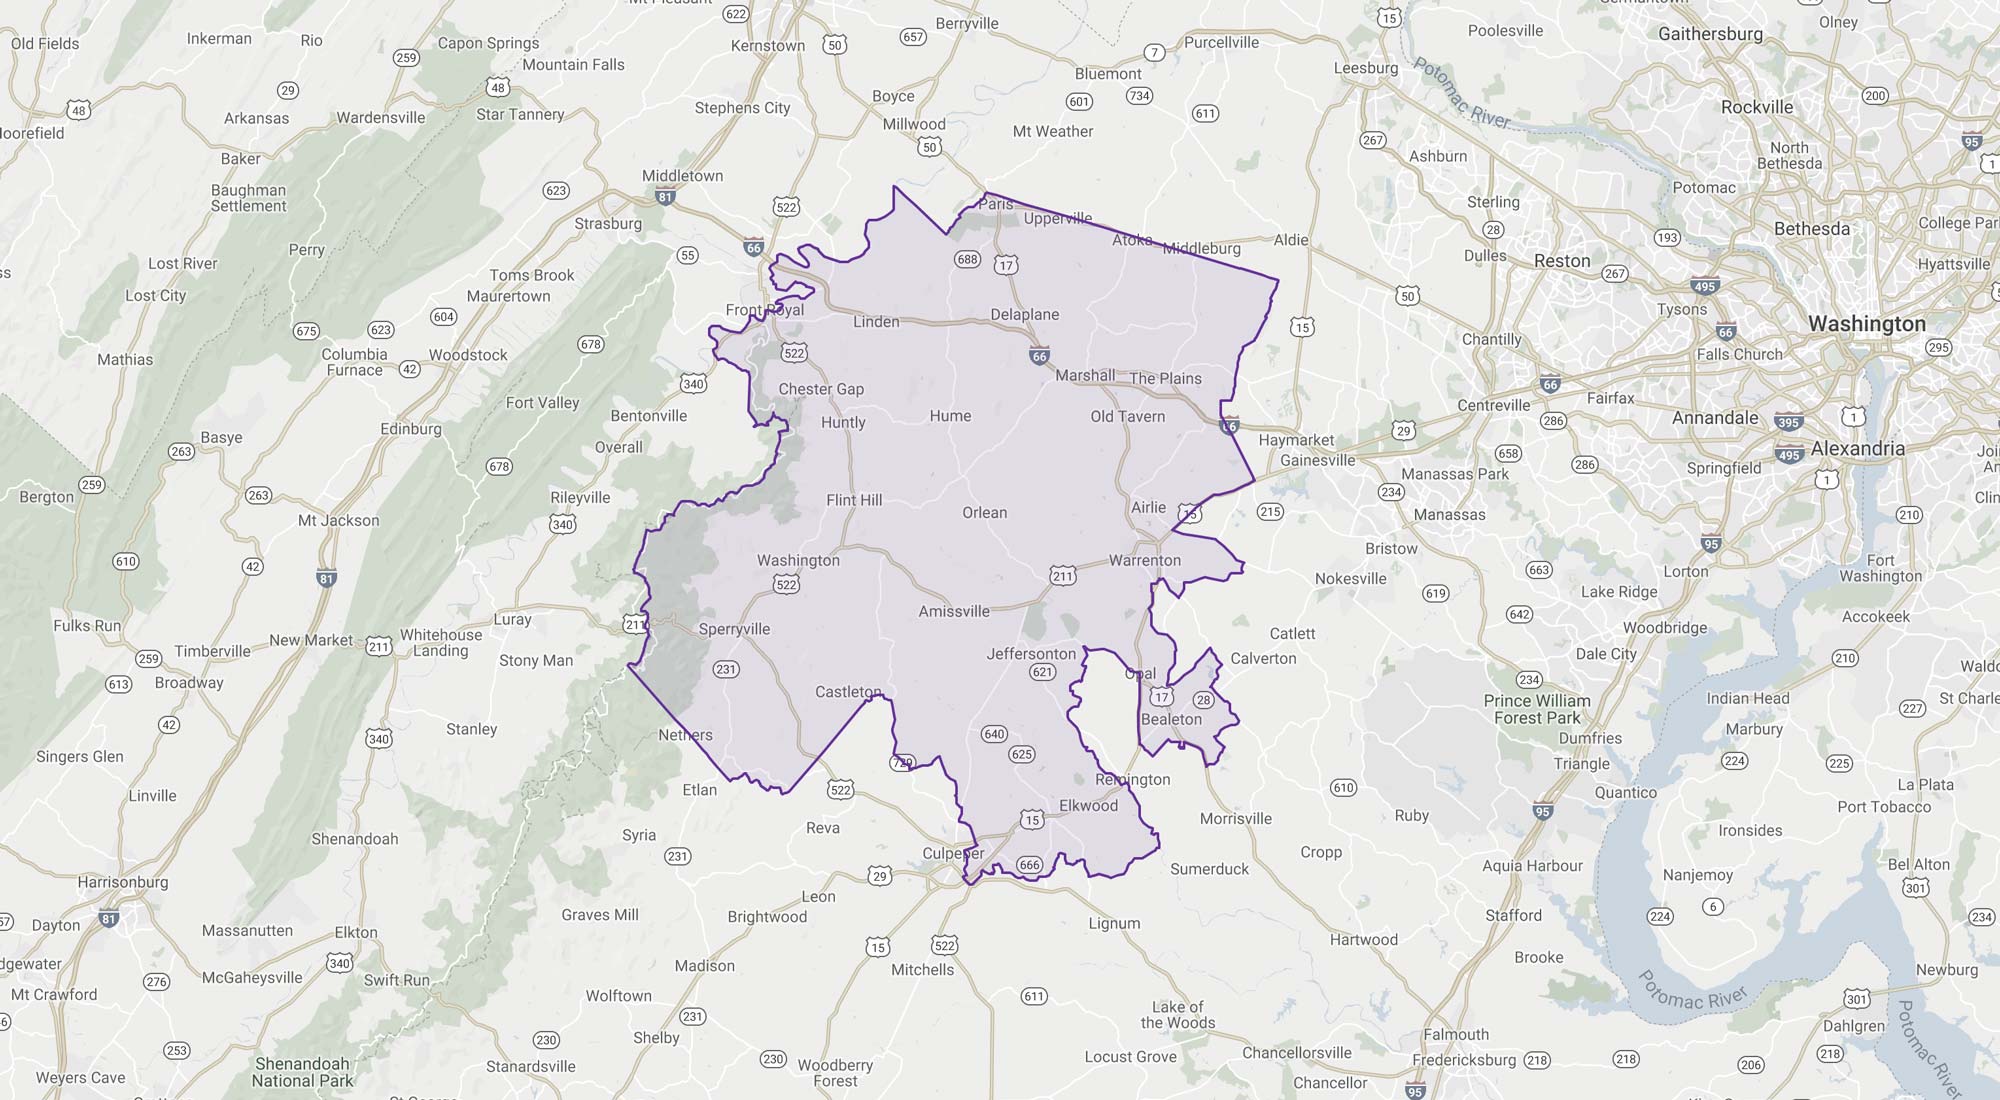 House of Delegates District 18